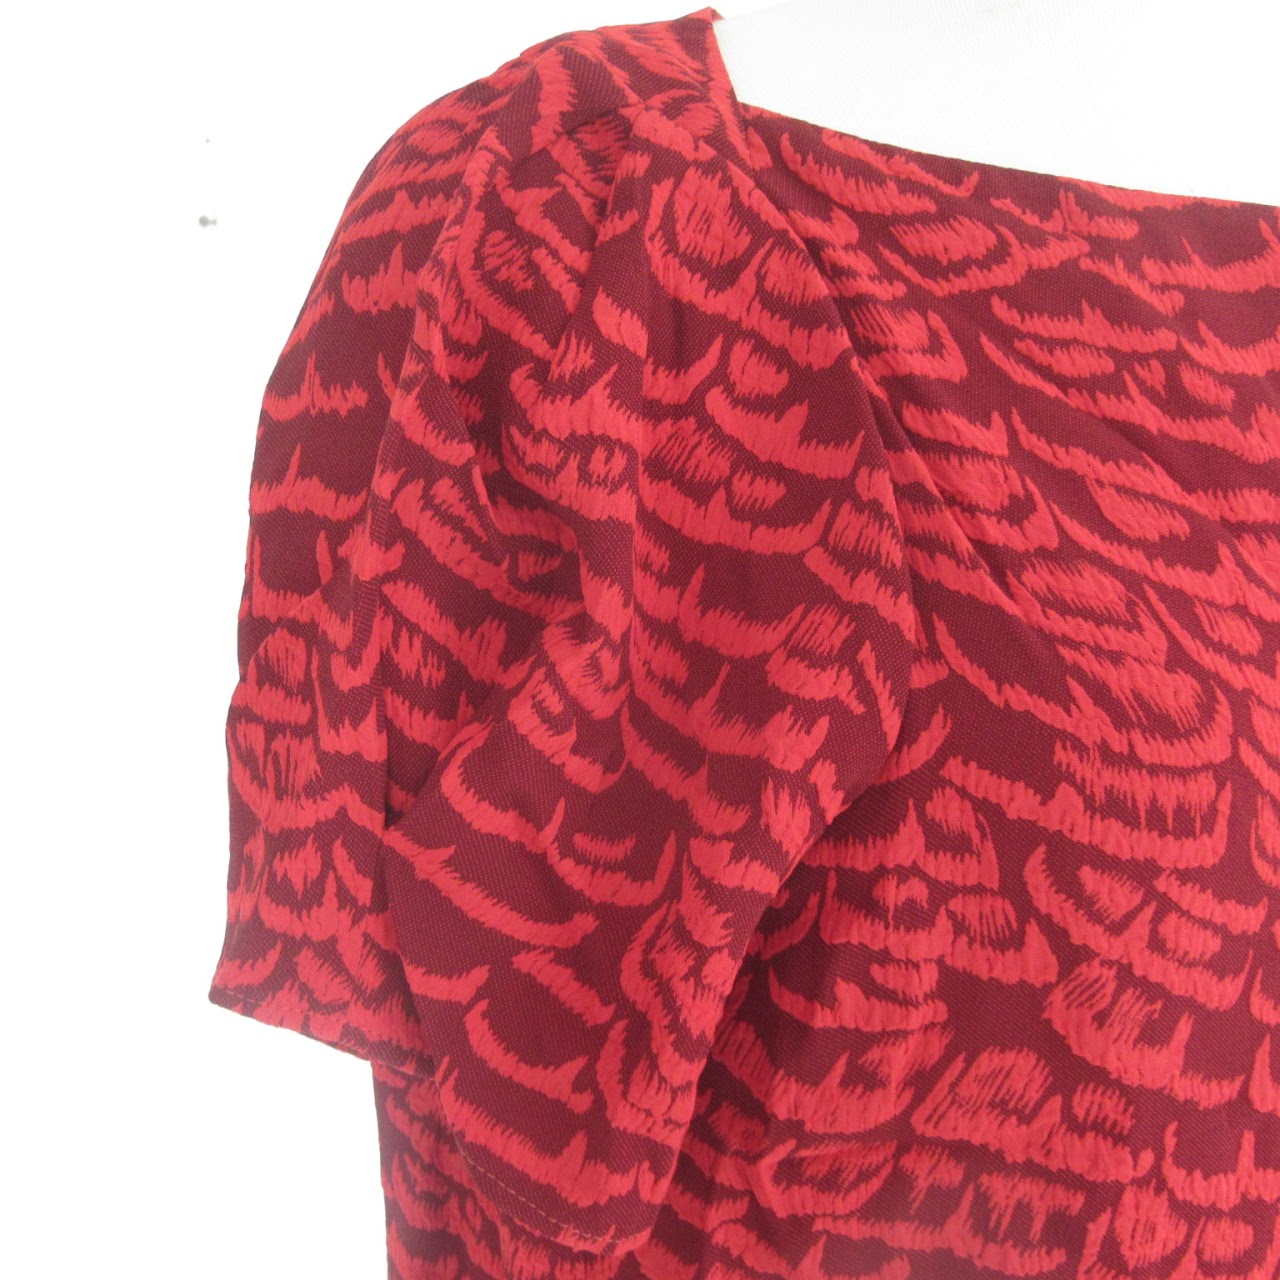 Kenzo Red Blouse